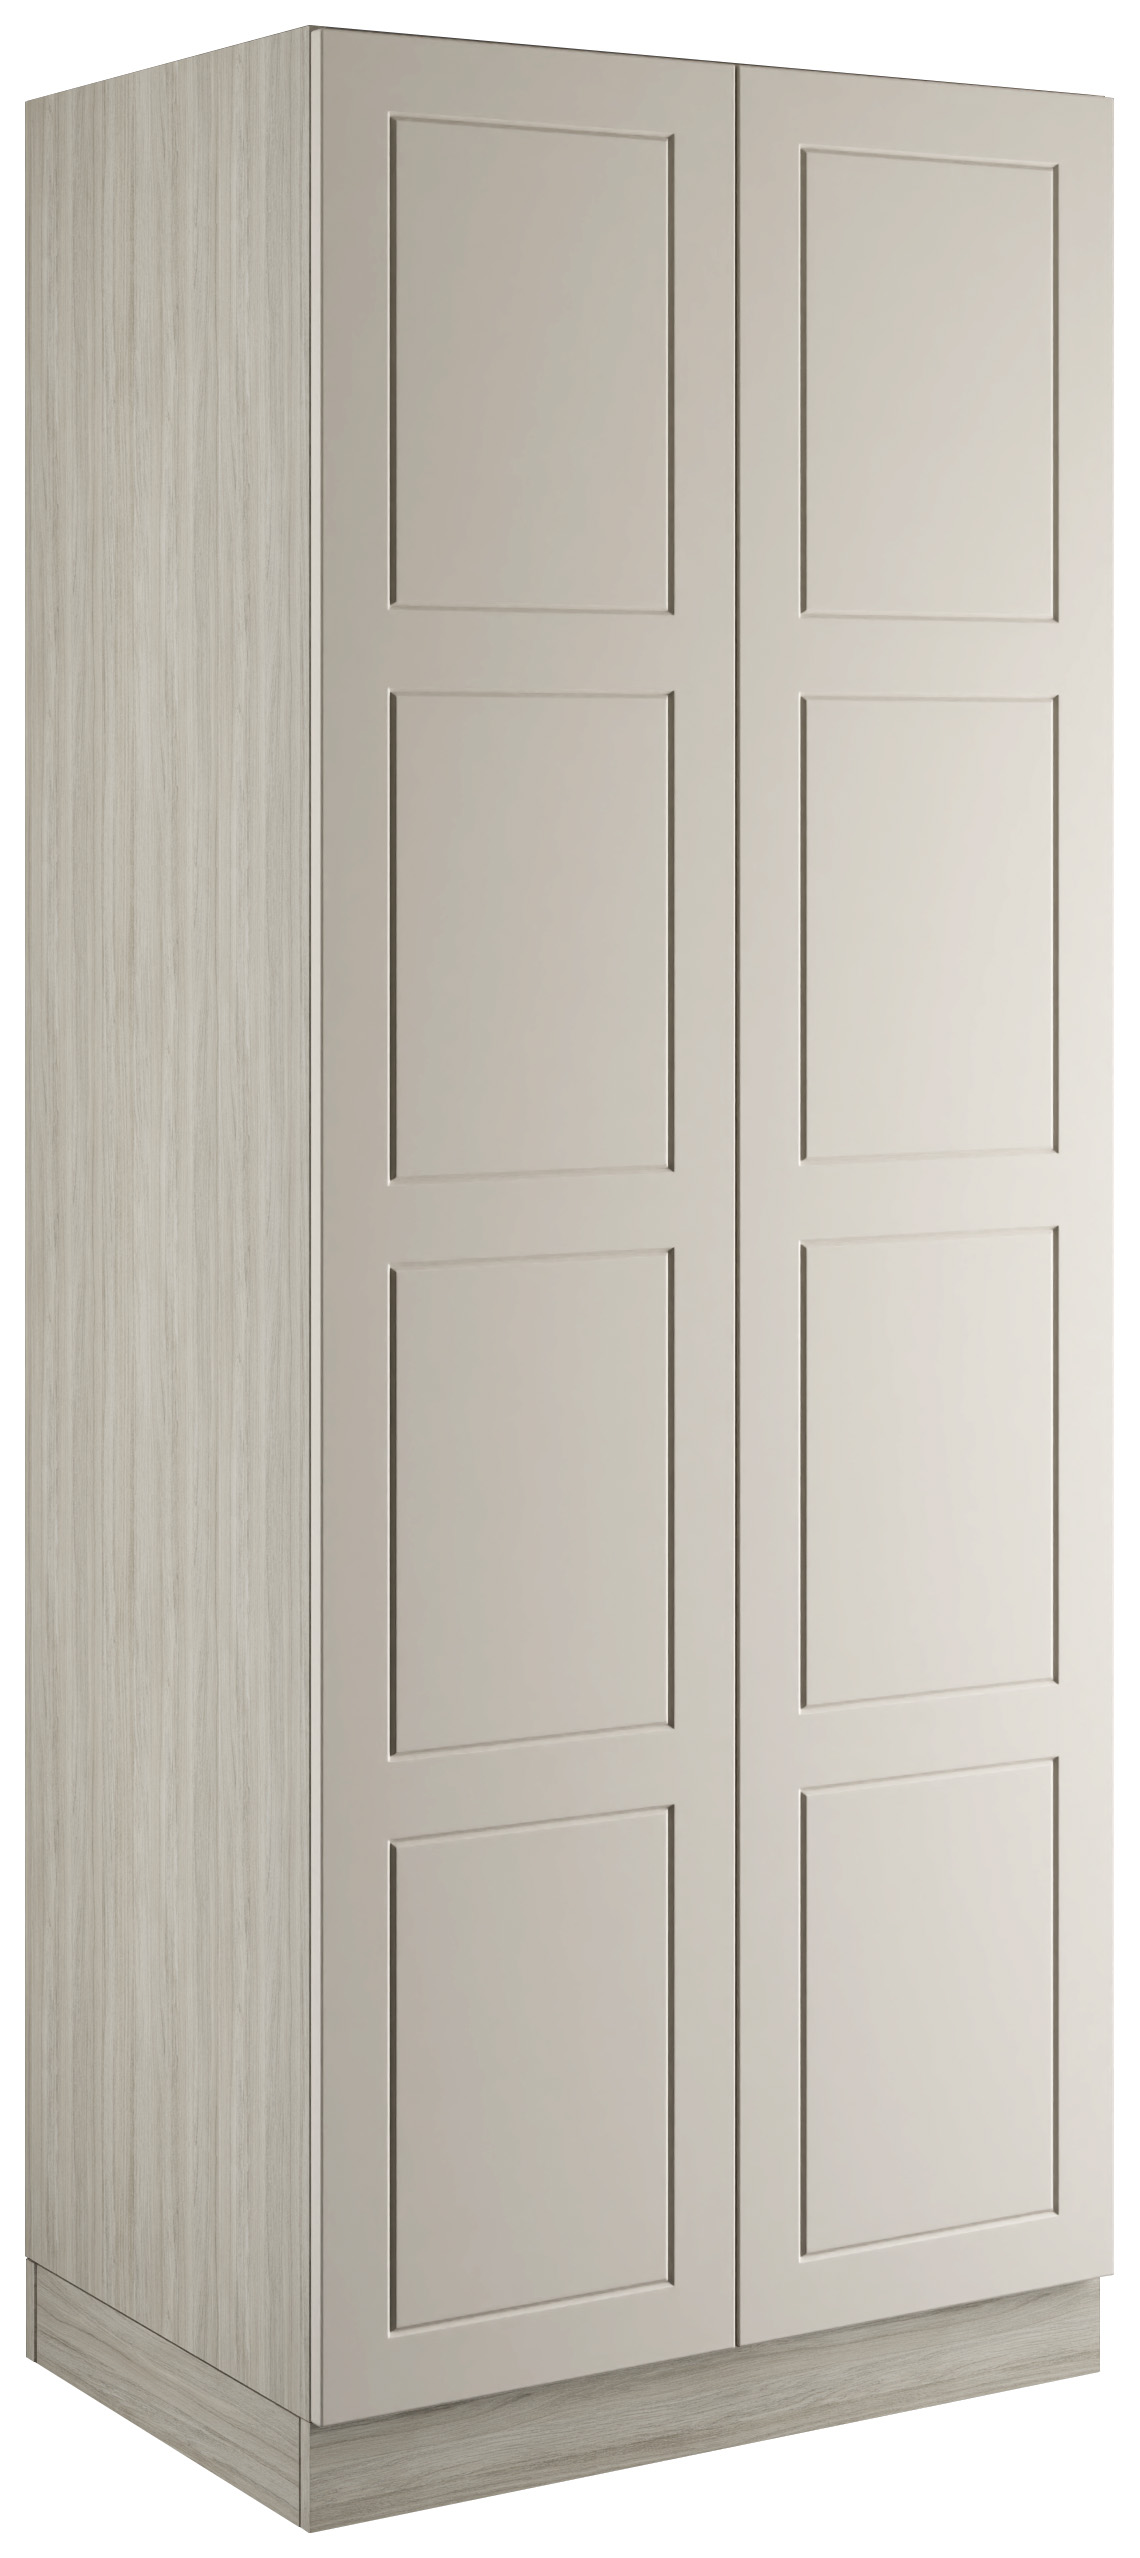 Bramham Taupe Grey Double Wardrobe with Shelves - 900 x 2260 x 608mm